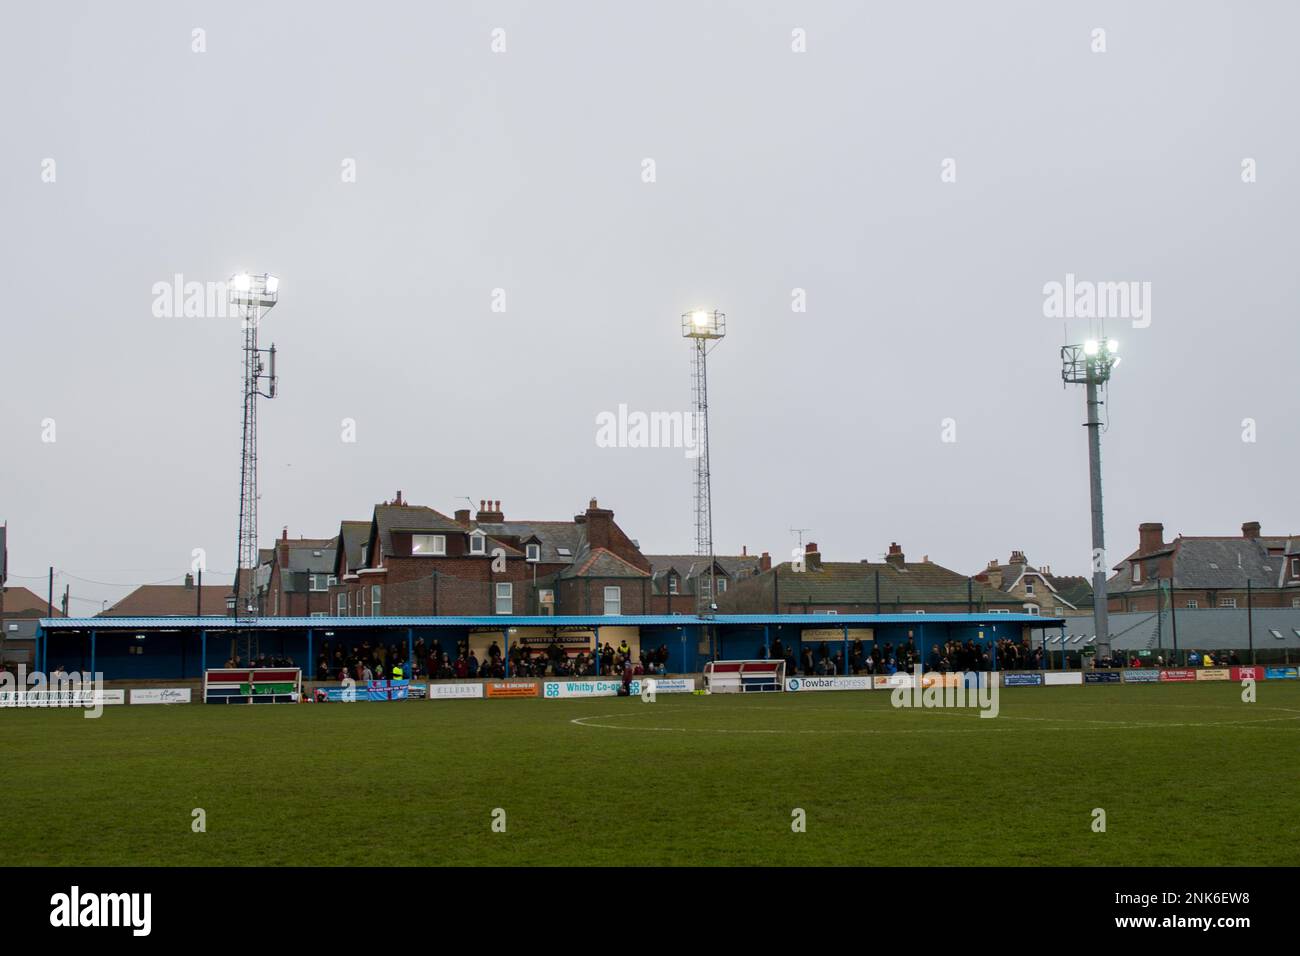 Whitby, England 27 December 2021. The Pitching In Northern Premier League match between Whitby Town and South Shields. Stock Photo